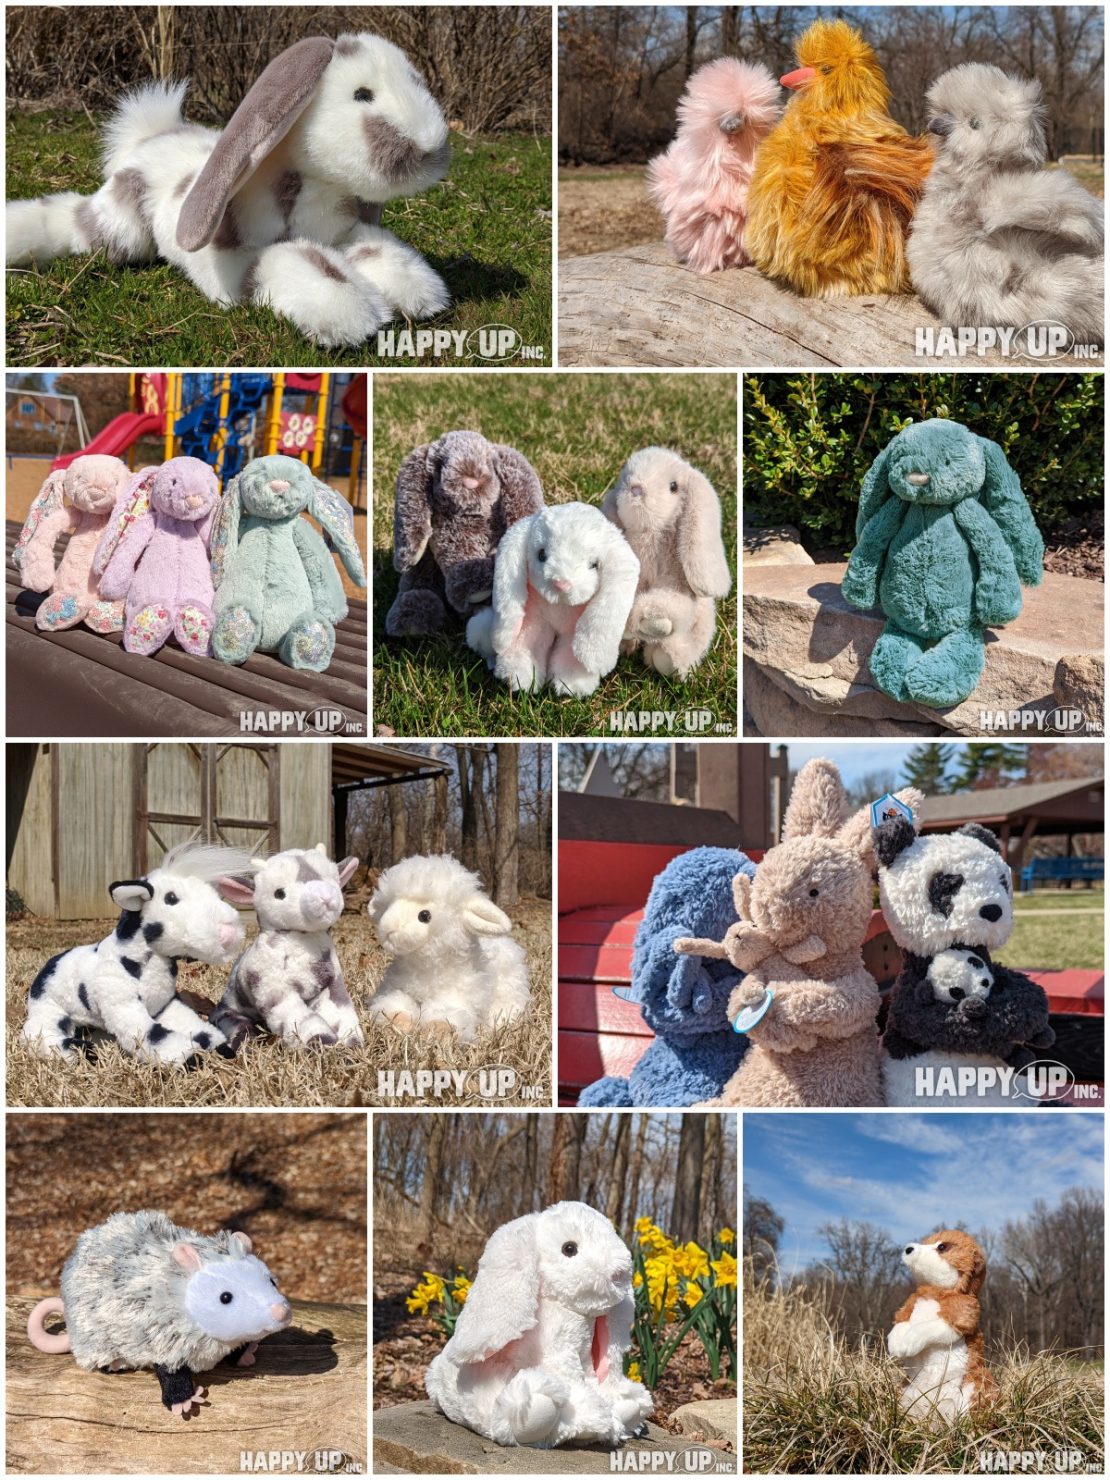 Bunny rabbits, baby farm animals, hens and chicks, adorable possum plush, and more!